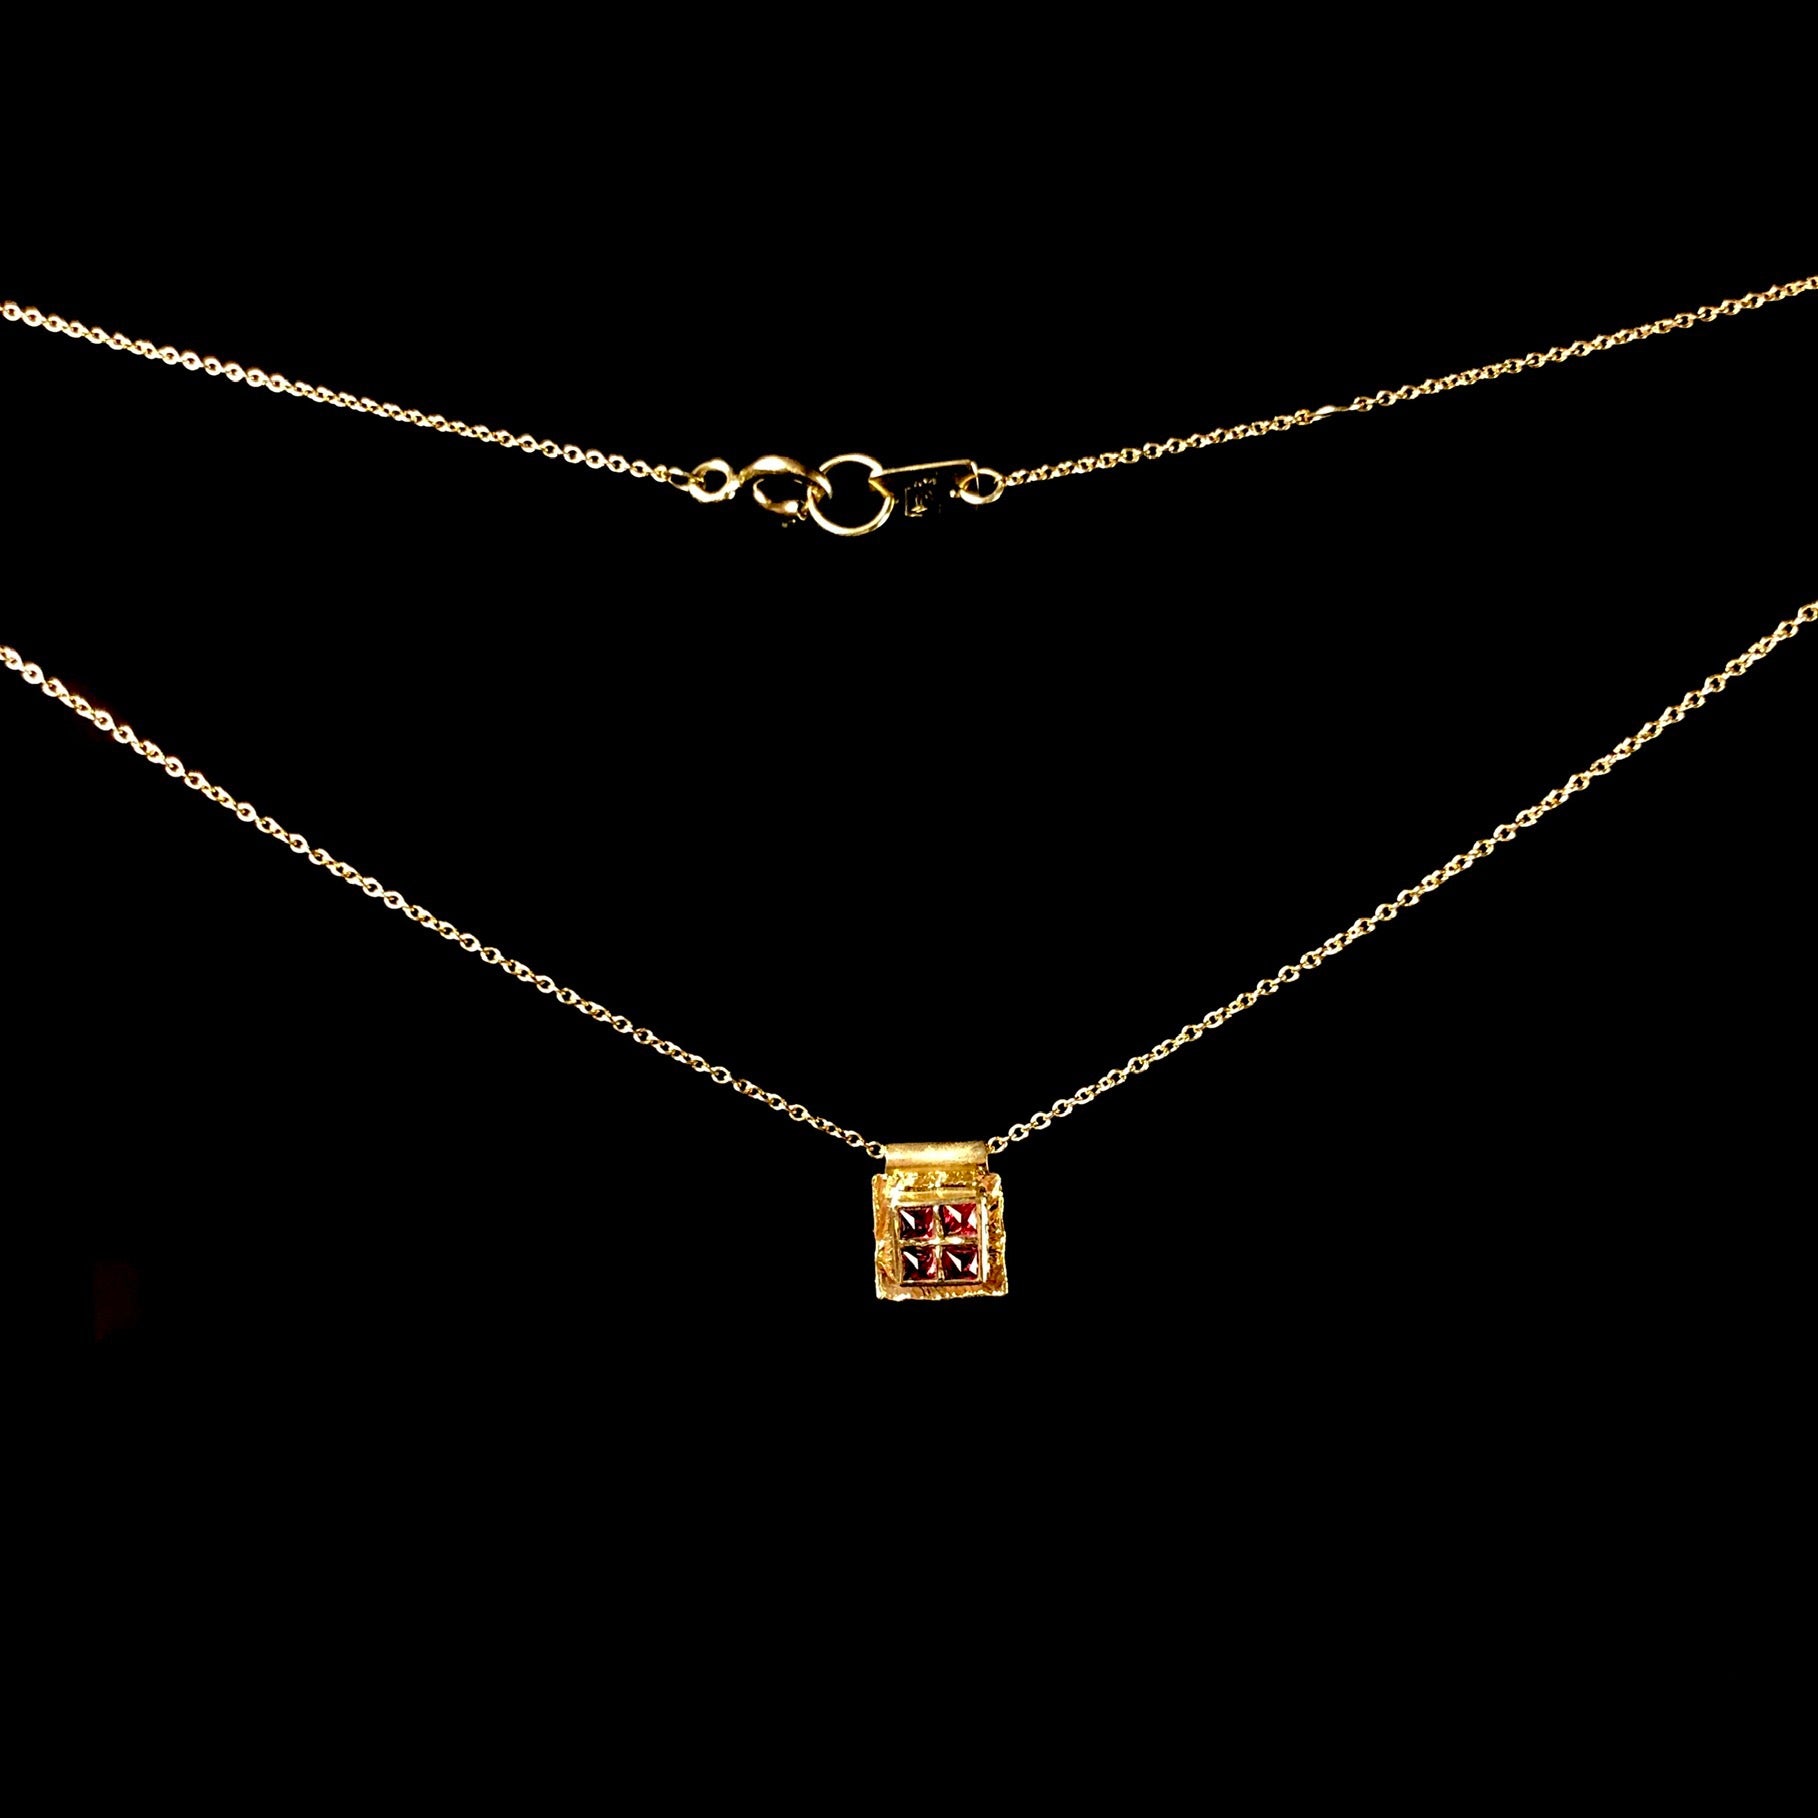 Four red spinel stones set in square platform on gold chain with clap showing